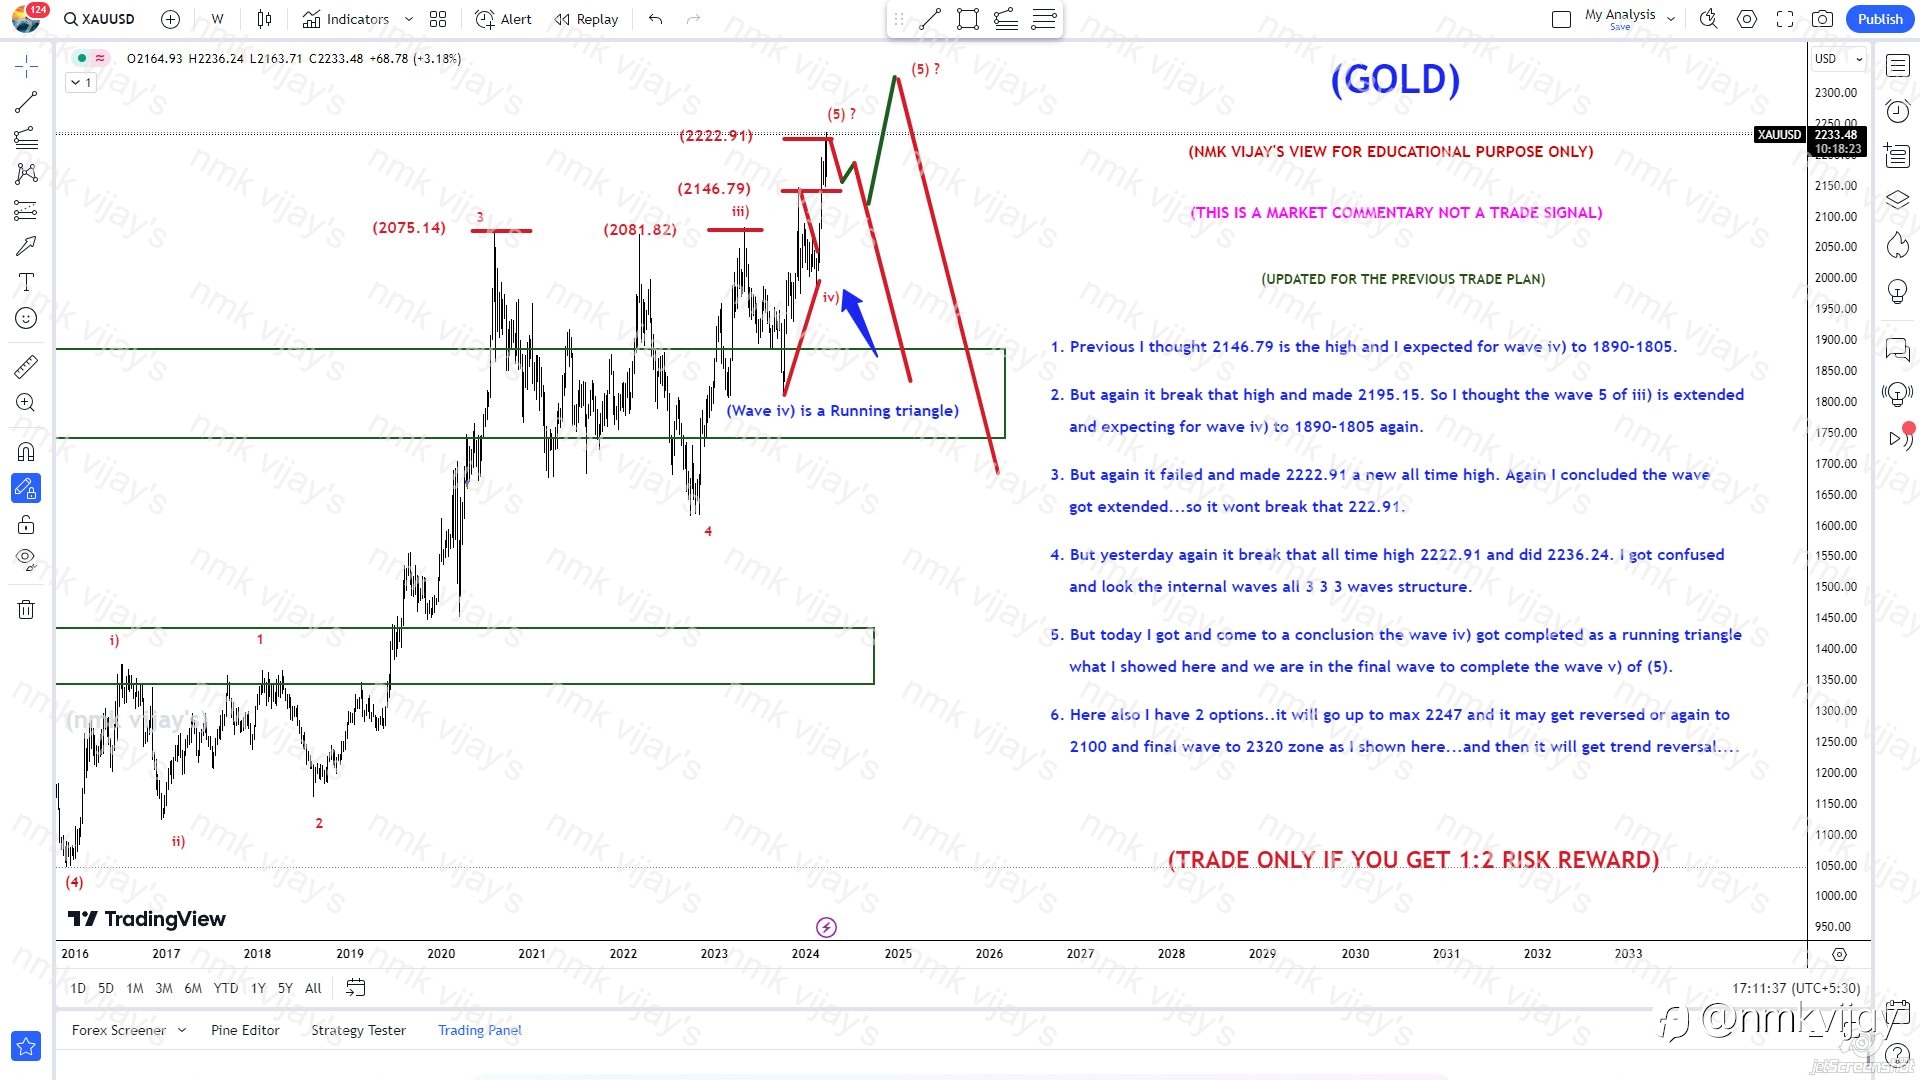 GOLD: Wave iv) already completed as a triangle, we are in v) (5)